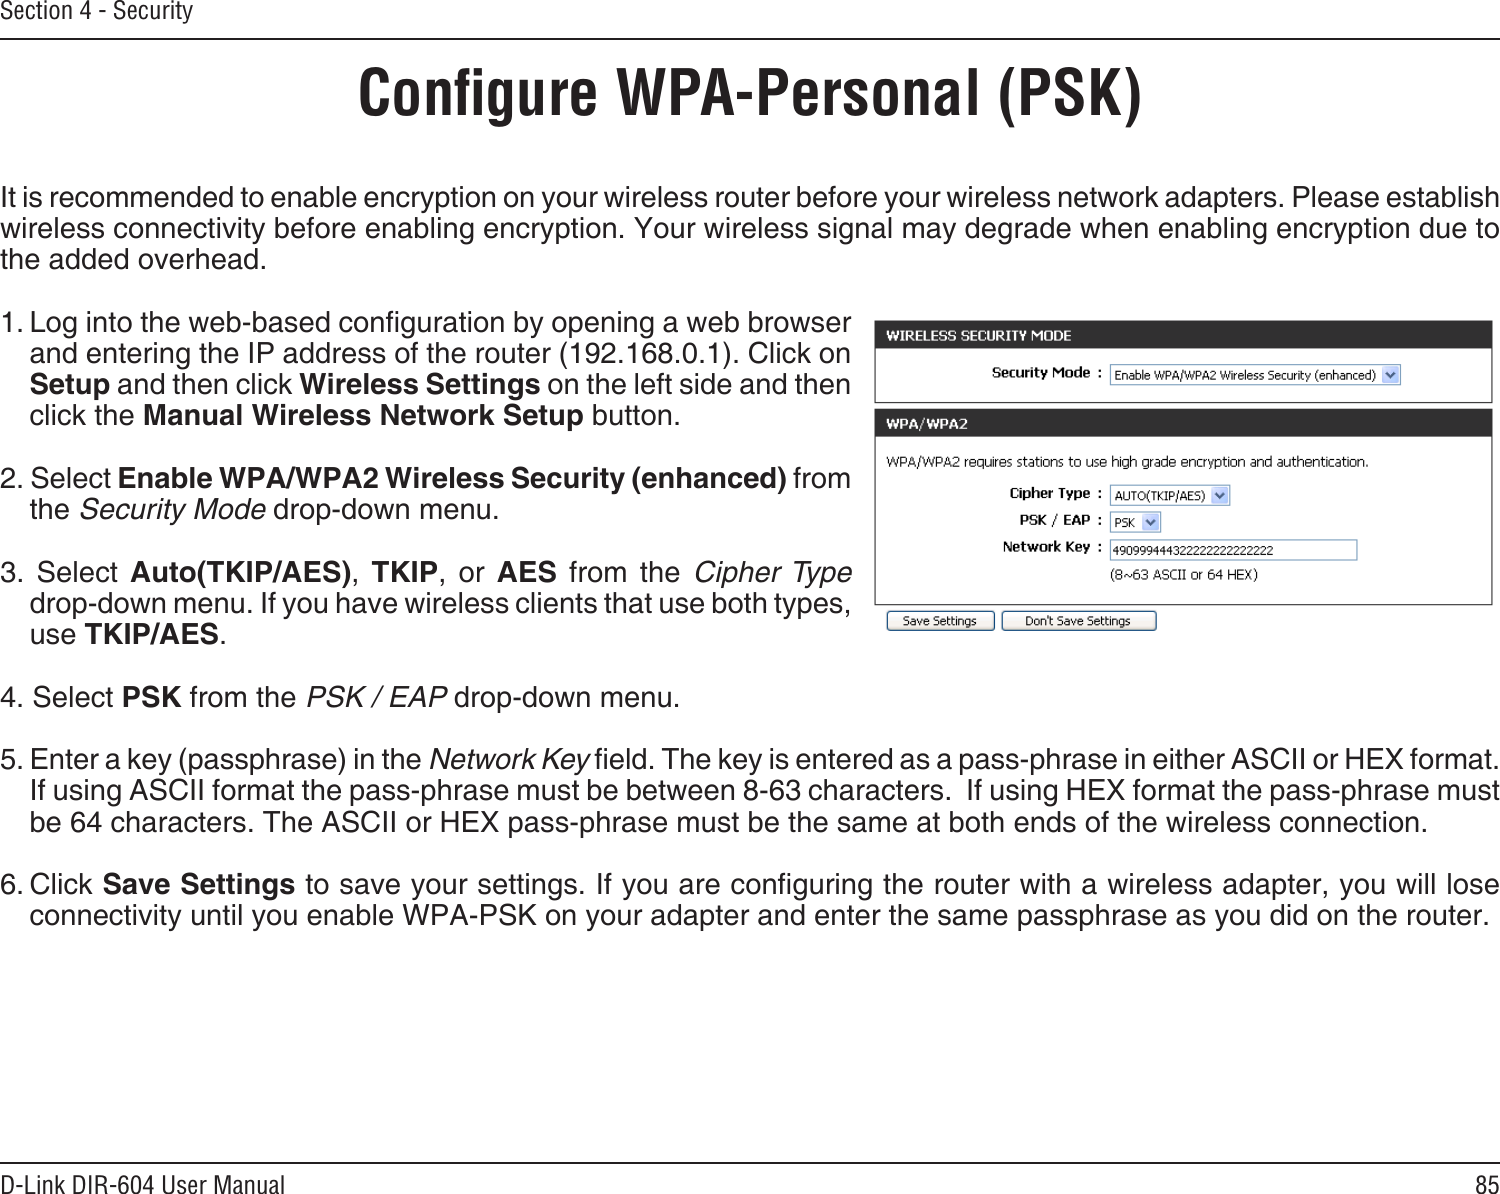 85D-Link DIR-604 User ManualSection 4 - SecurityConﬁgure WPA-Personal (PSK)It is recommended to enable encryption on your wireless router before your wireless network adapters. Please establish wireless connectivity before enabling encryption. Your wireless signal may degrade when enabling encryption due to the added overhead.1. Log into the web-based conguration by opening a web browser and entering the IP address of the router (192.168.0.1). Click on Setup and then click Wireless Settings on the left side and then click the Manual Wireless Network Setup button.2. Select Enable WPA/WPA2 Wireless Security (enhanced) from the Security Mode drop-down menu.3.  Select  Auto(TKIP/AES),  TKIP,  or  AES  from  the  Cipher Type drop-down menu. If you have wireless clients that use both types, use TKIP/AES.4. Select PSK from the PSK / EAP drop-down menu.5. Enter a key (passphrase) in the Network Key eld. The key is entered as a pass-phrase in either ASCII or HEX format. If using ASCII format the pass-phrase must be between 8-63 characters.  If using HEX format the pass-phrase must be 64 characters. The ASCII or HEX pass-phrase must be the same at both ends of the wireless connection. 6. Click Save Settings to save your settings. If you are conguring the router with a wireless adapter, you will lose connectivity until you enable WPA-PSK on your adapter and enter the same passphrase as you did on the router.